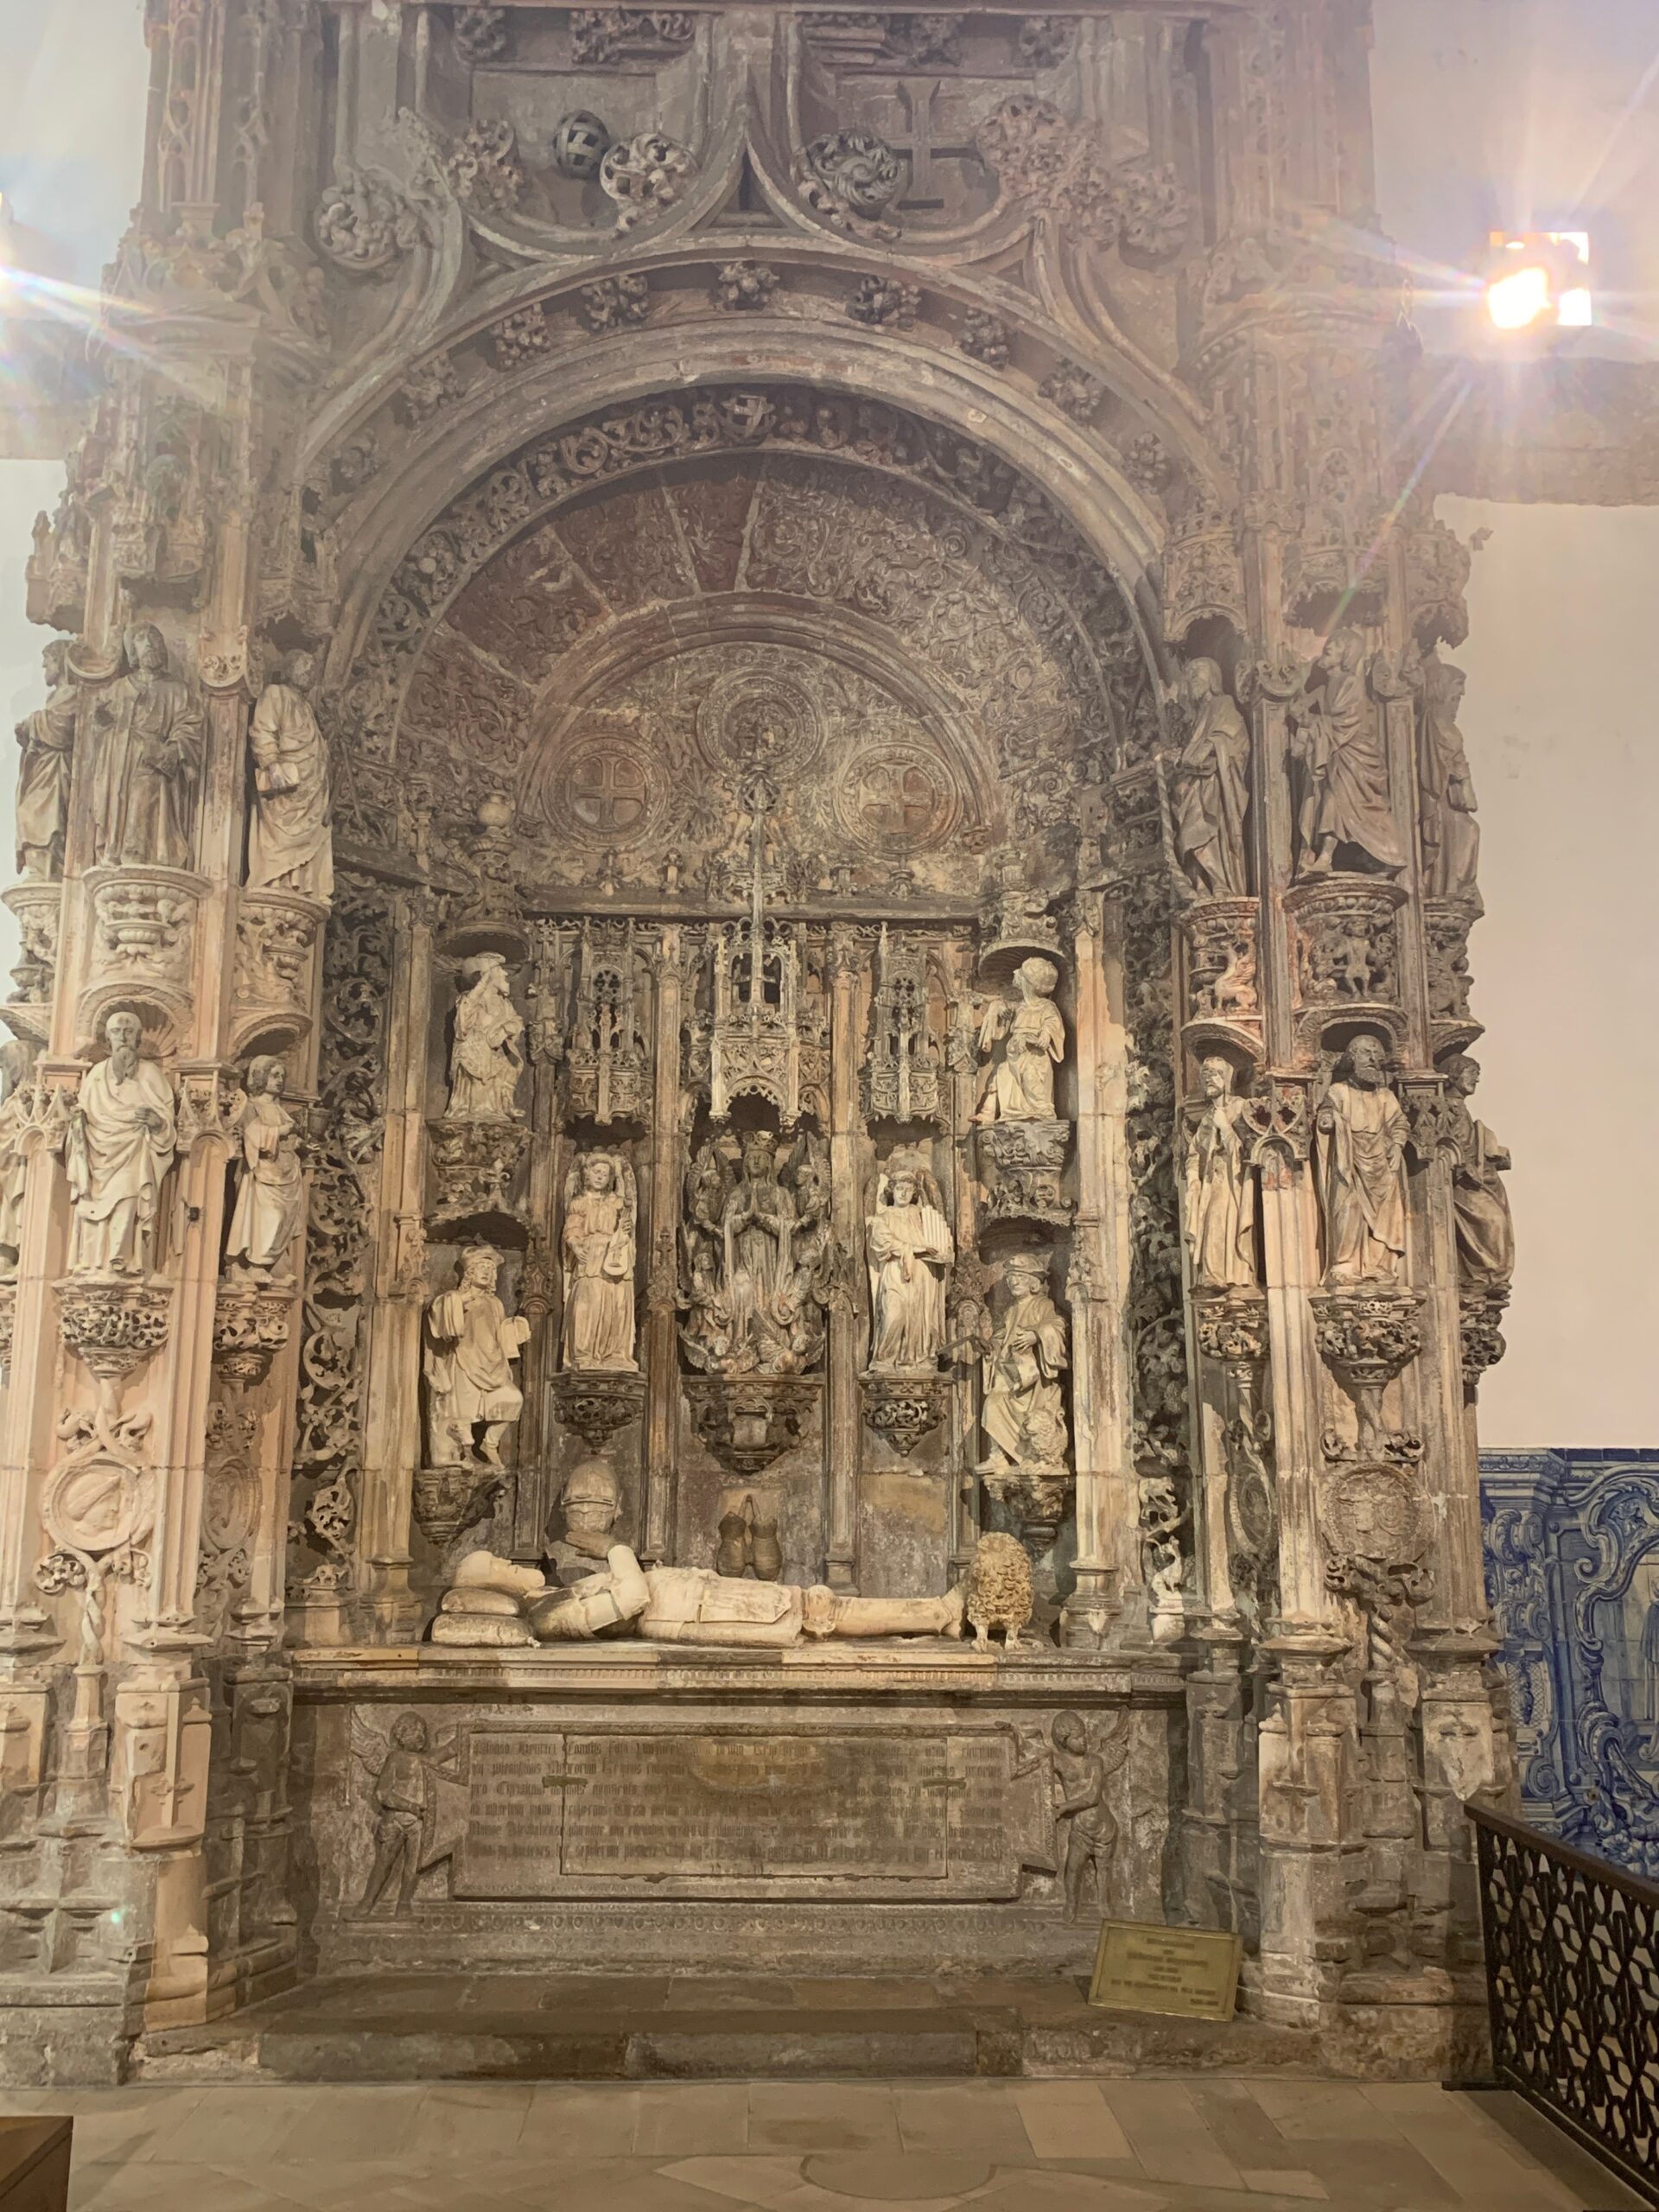 Afonso Henriques tomb, flanking the main alter. On the opposite side, so facing his tomb, lies that of his son, King Sancho I.